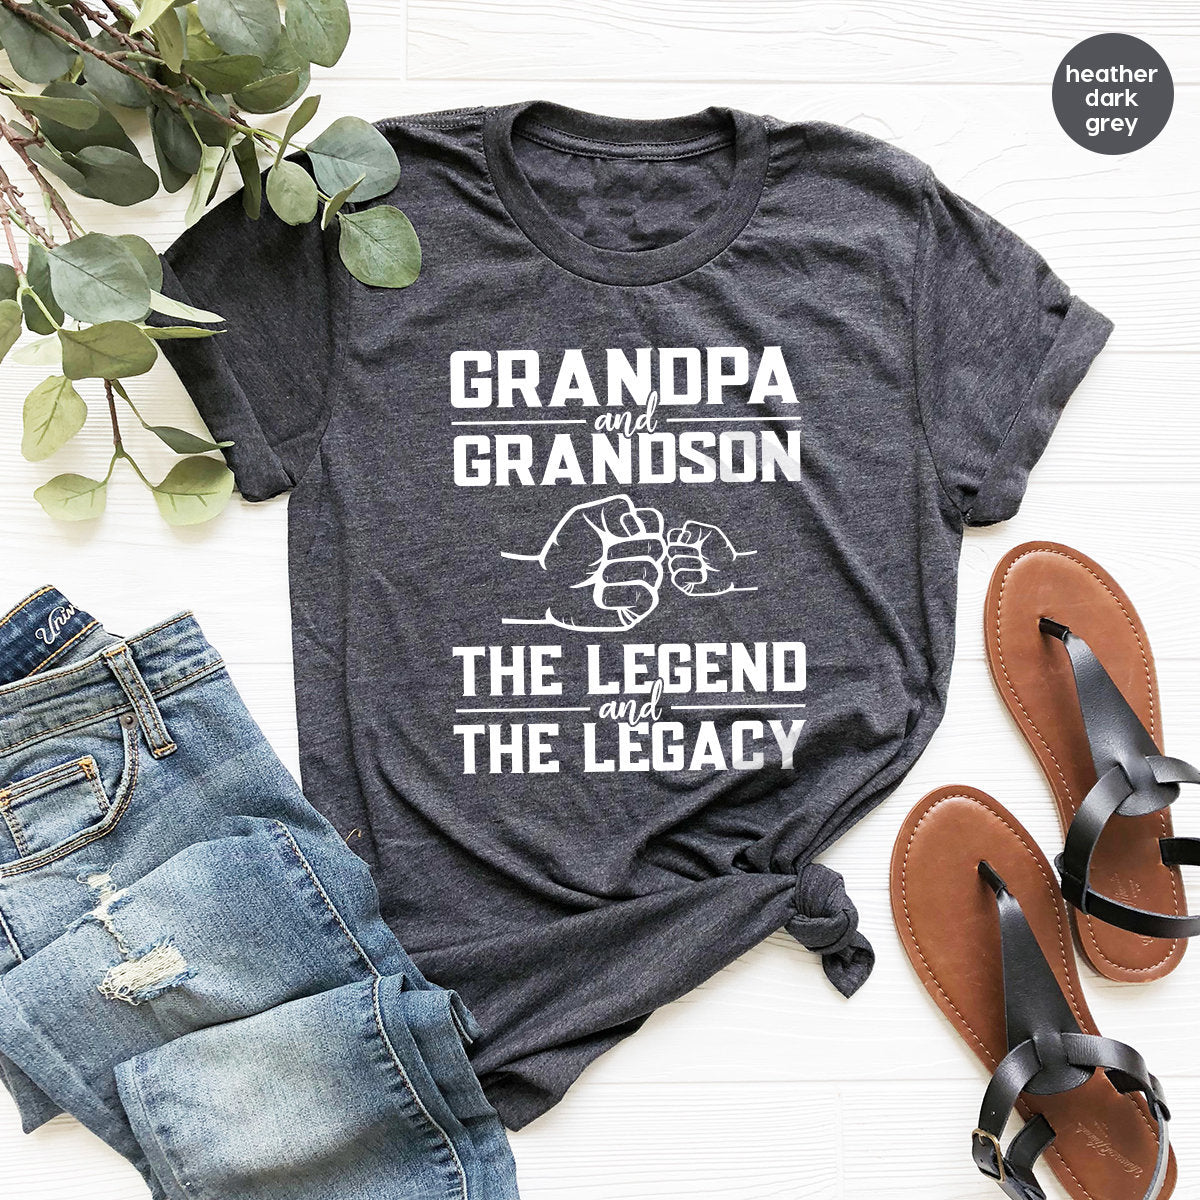 Father's day Mens In A World Full Of Grandpas Be A Papa T-Shirt